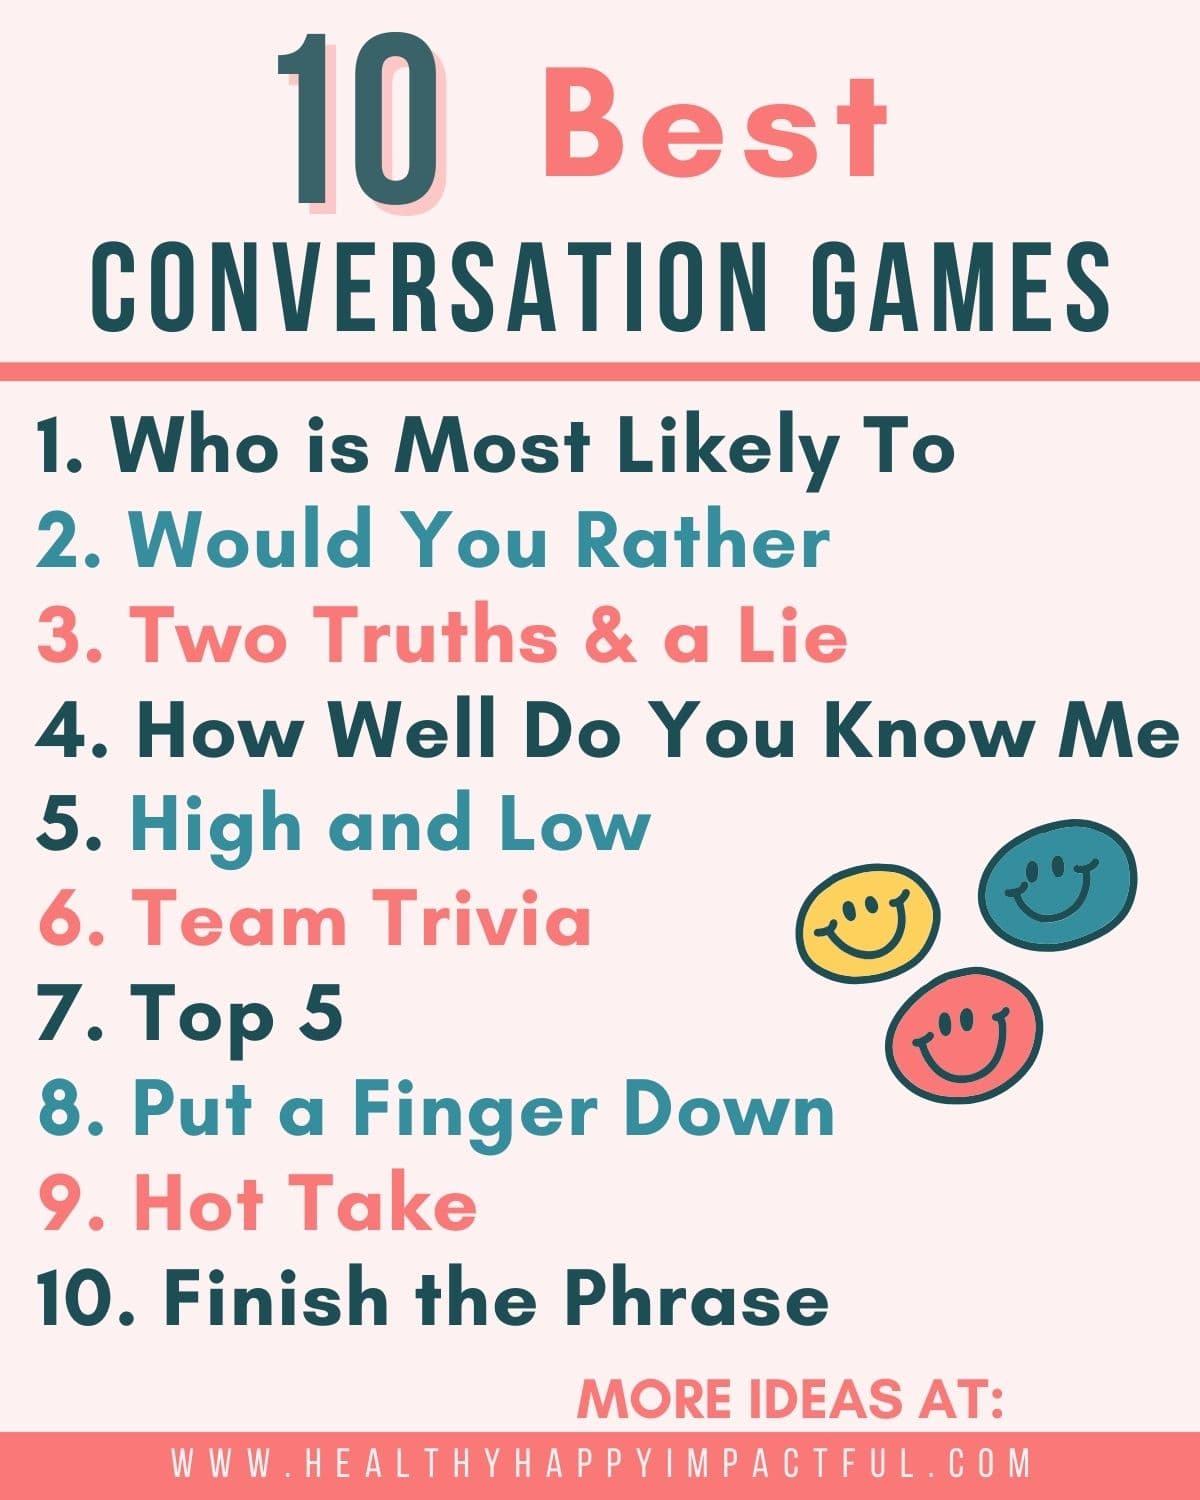 Fun conversation talking games to play with family and friends